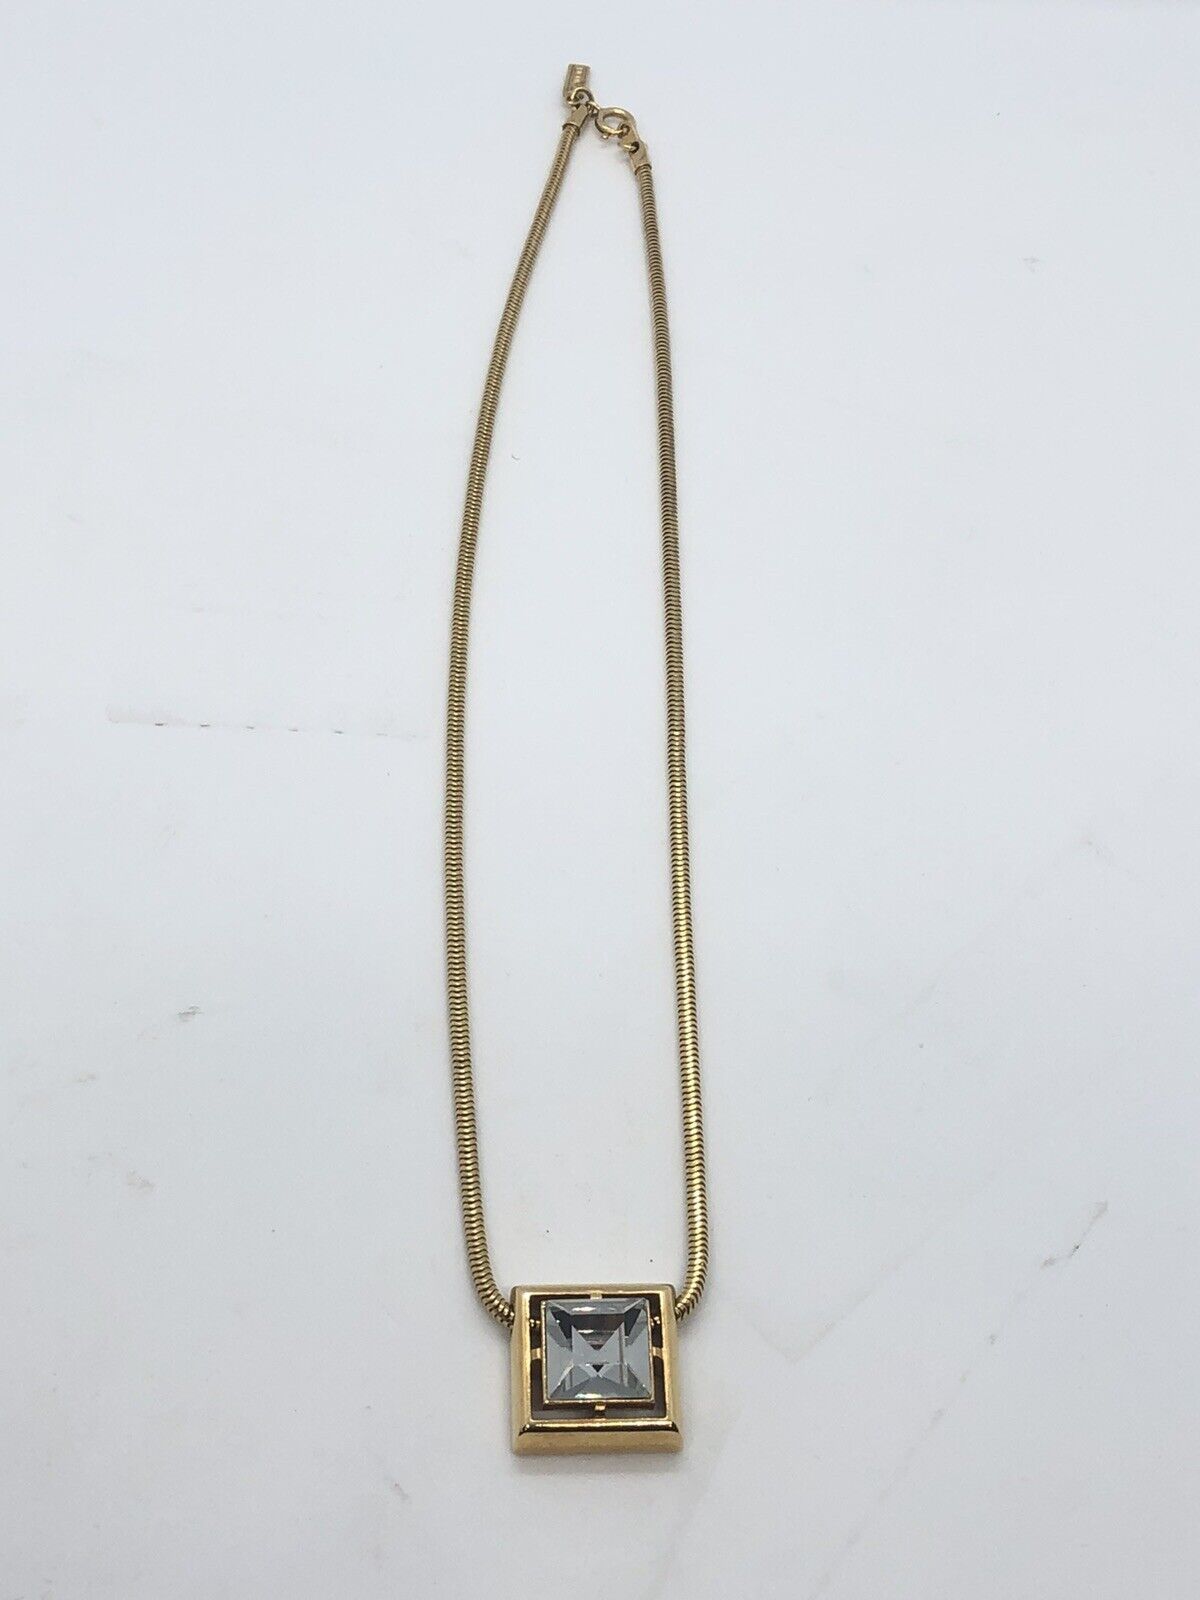 Primary image for Attractive gold colors 18"" necklace by Avon square cut Cz 1.3cm x 1.3cm-
sho...